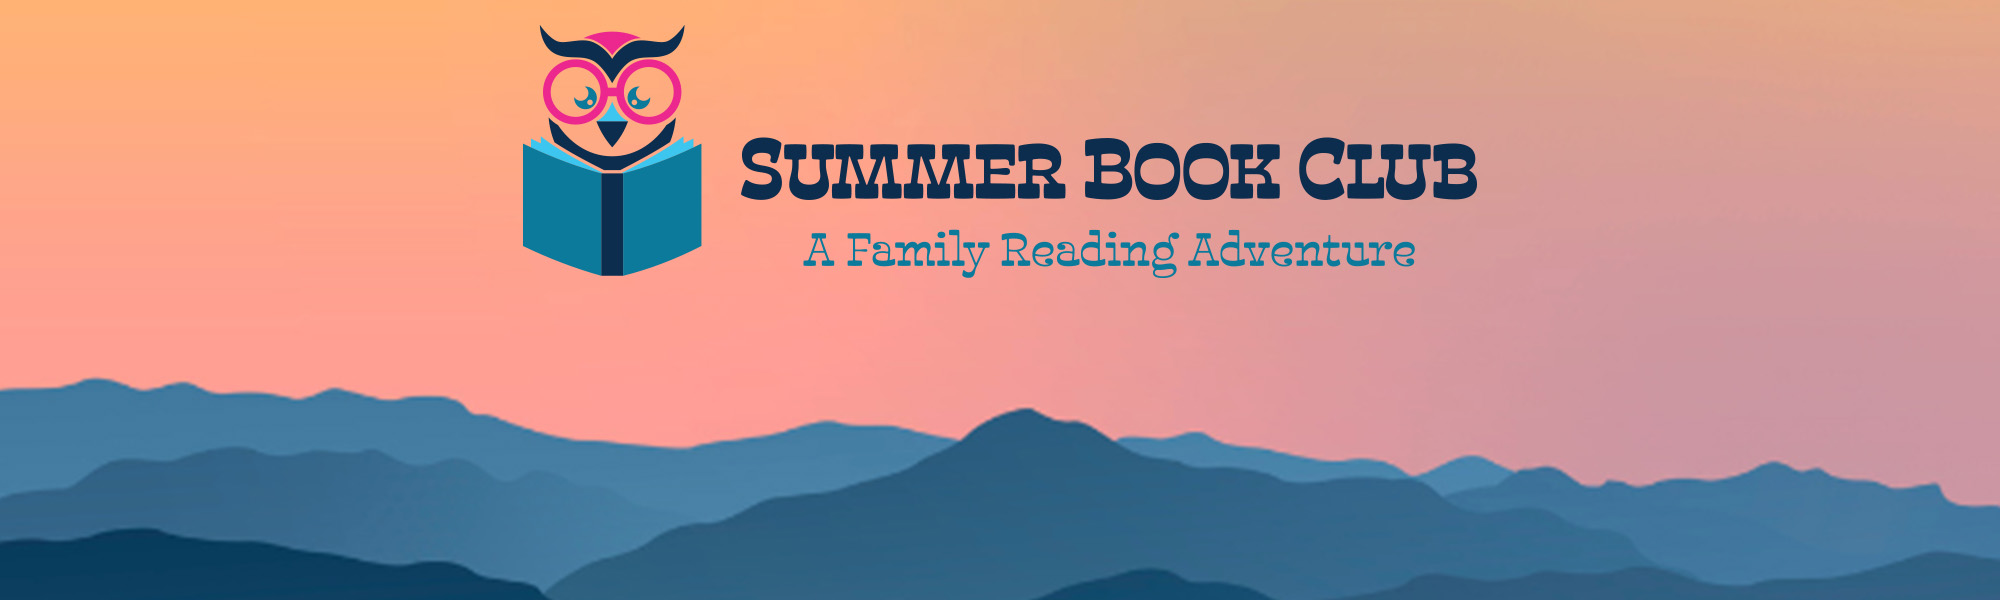 Summer Book Club: A Family Reading Adventure